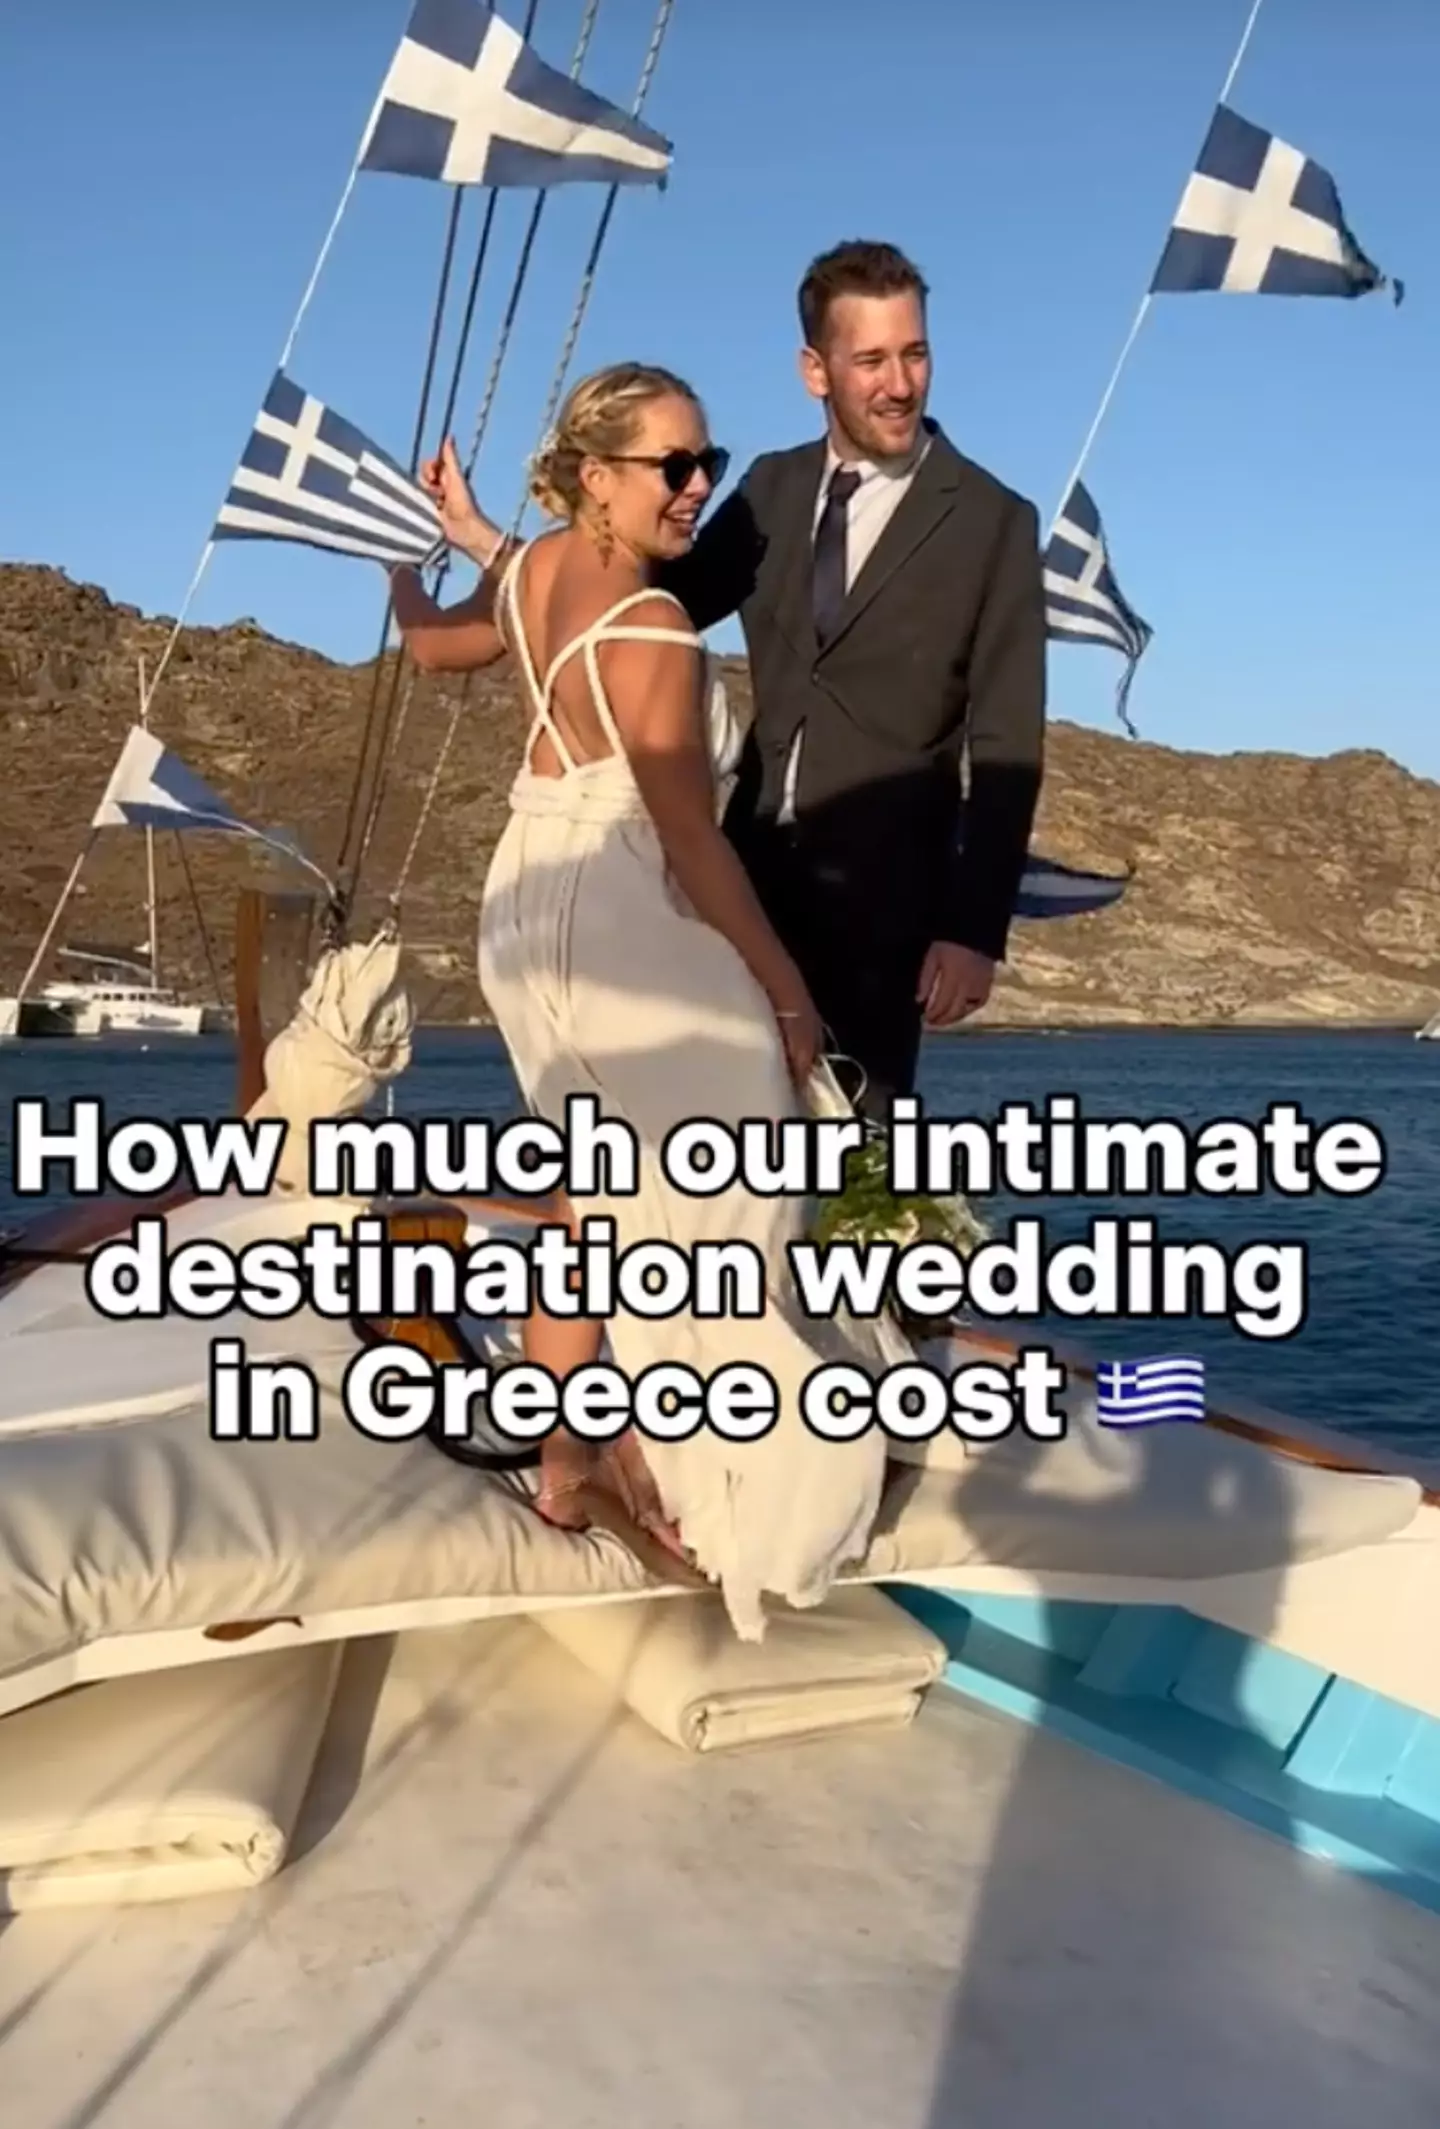 One woman has left viewers divided after sharing the cost rundown of her intimate Greek destination wedding.